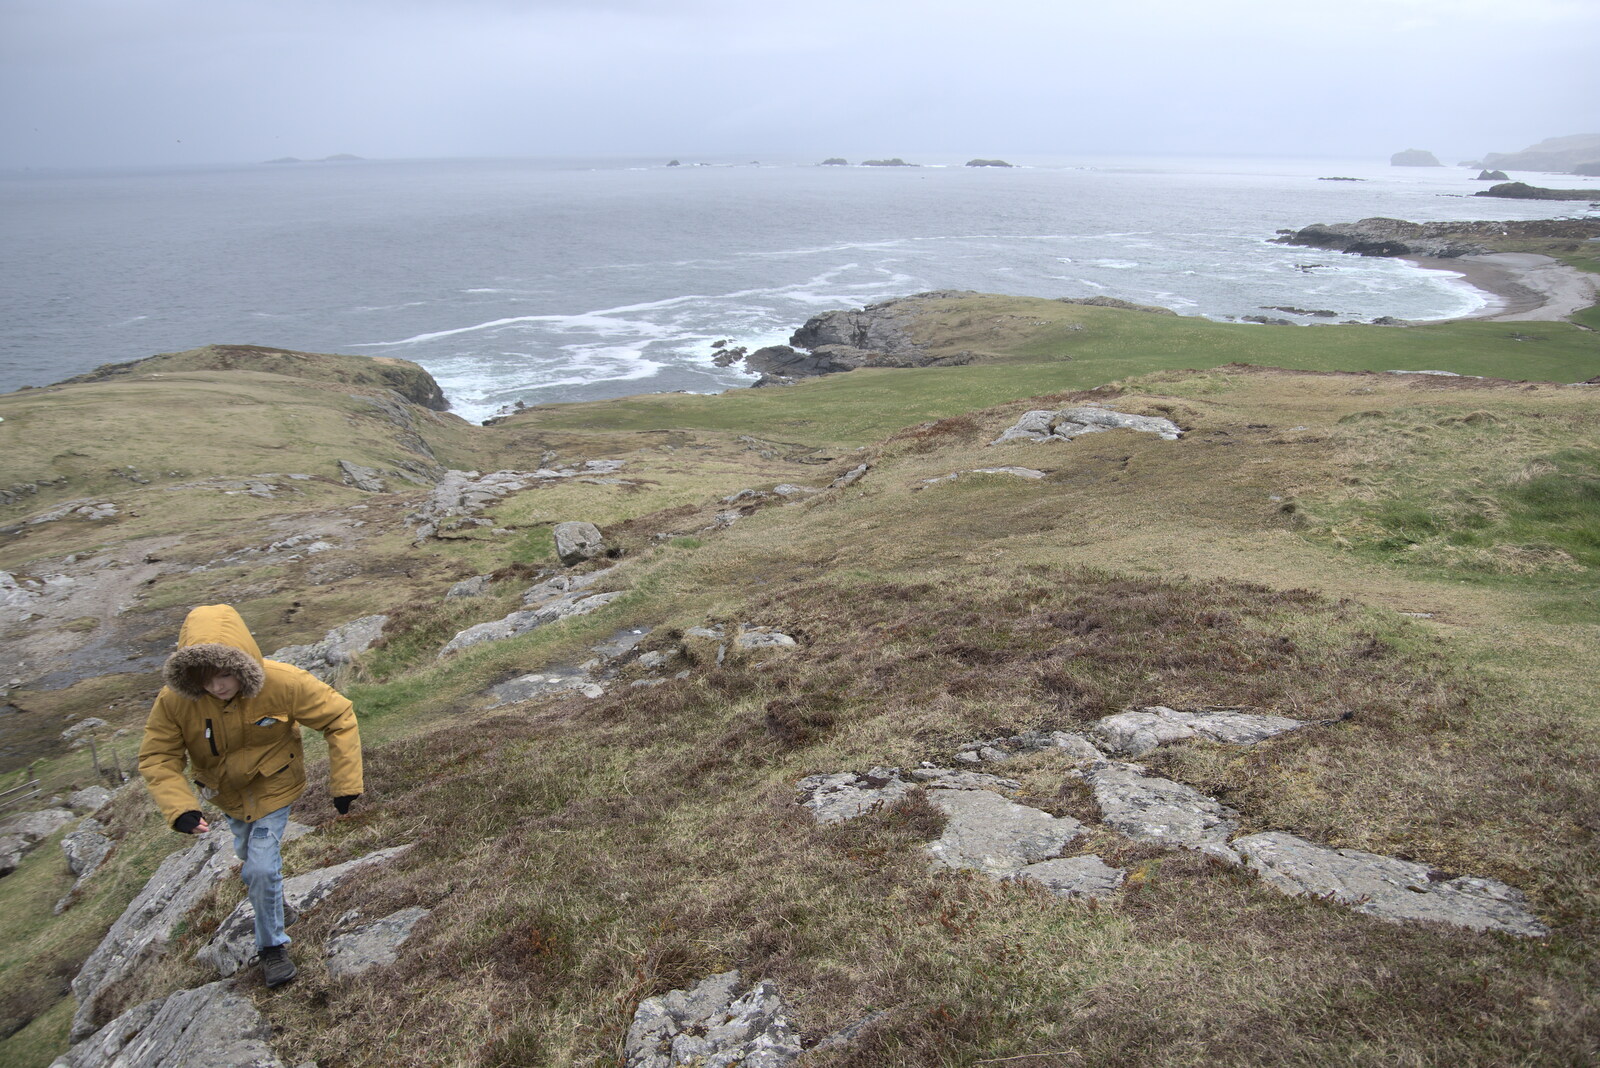 Greencastle, Doagh and Malin Head, County Donegal, Ireland - 19th April 2022: Harry runs around